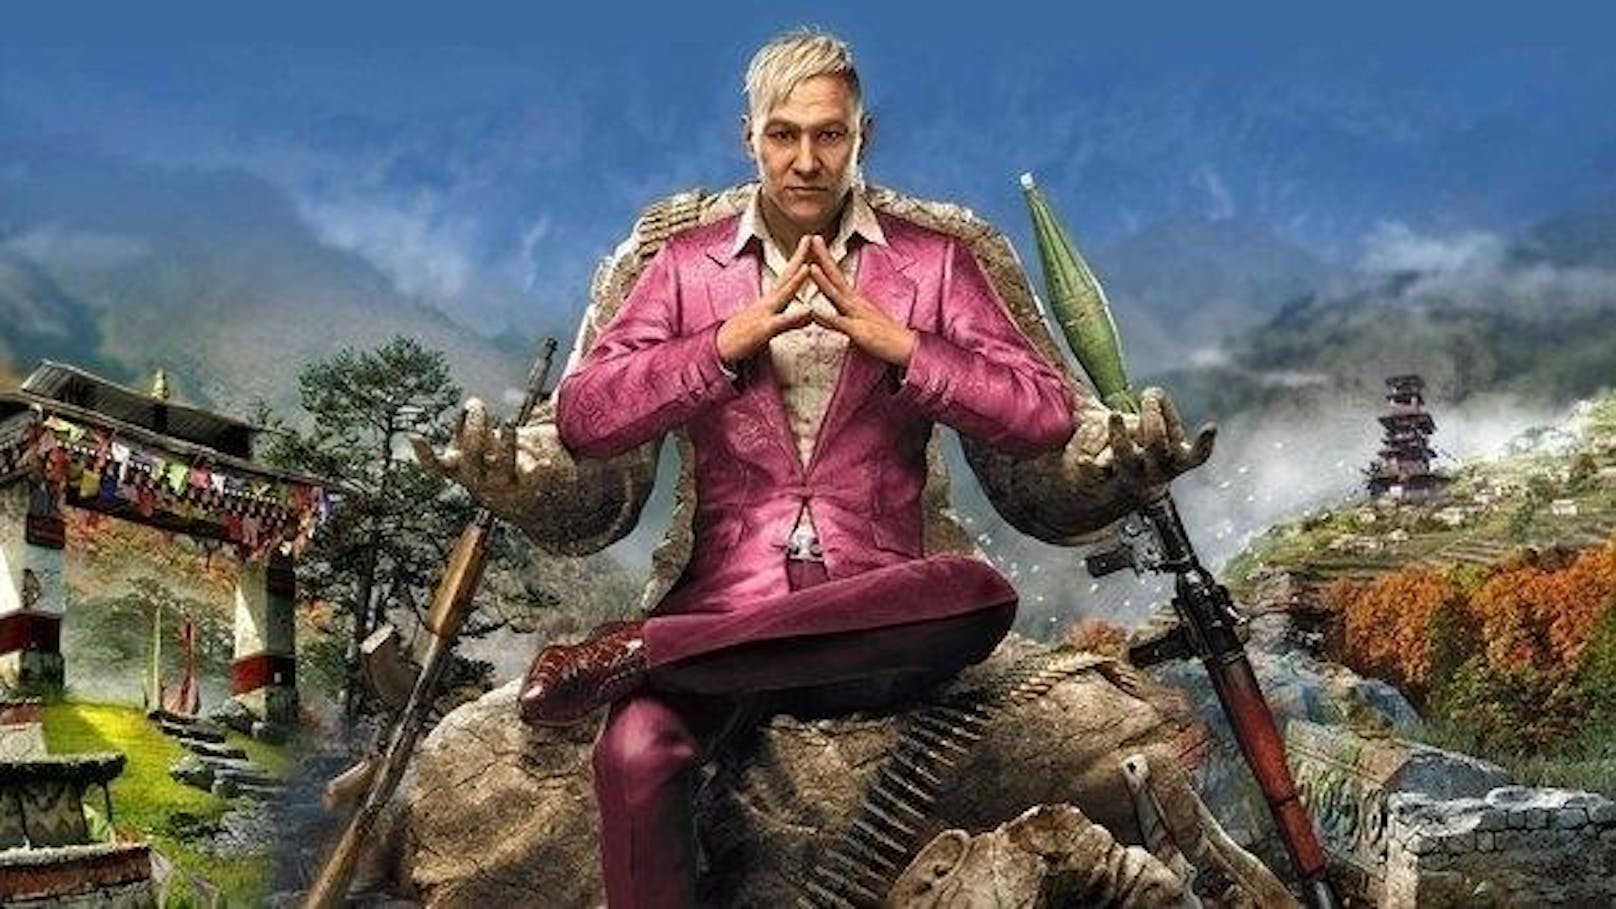  <a href="https://www.heute.at/timeout/games/story/Far-Cry-4-im-Test--Mitten-drin-in-der-Rebellion-15952209" target="_blank">Far Cry 4</a>